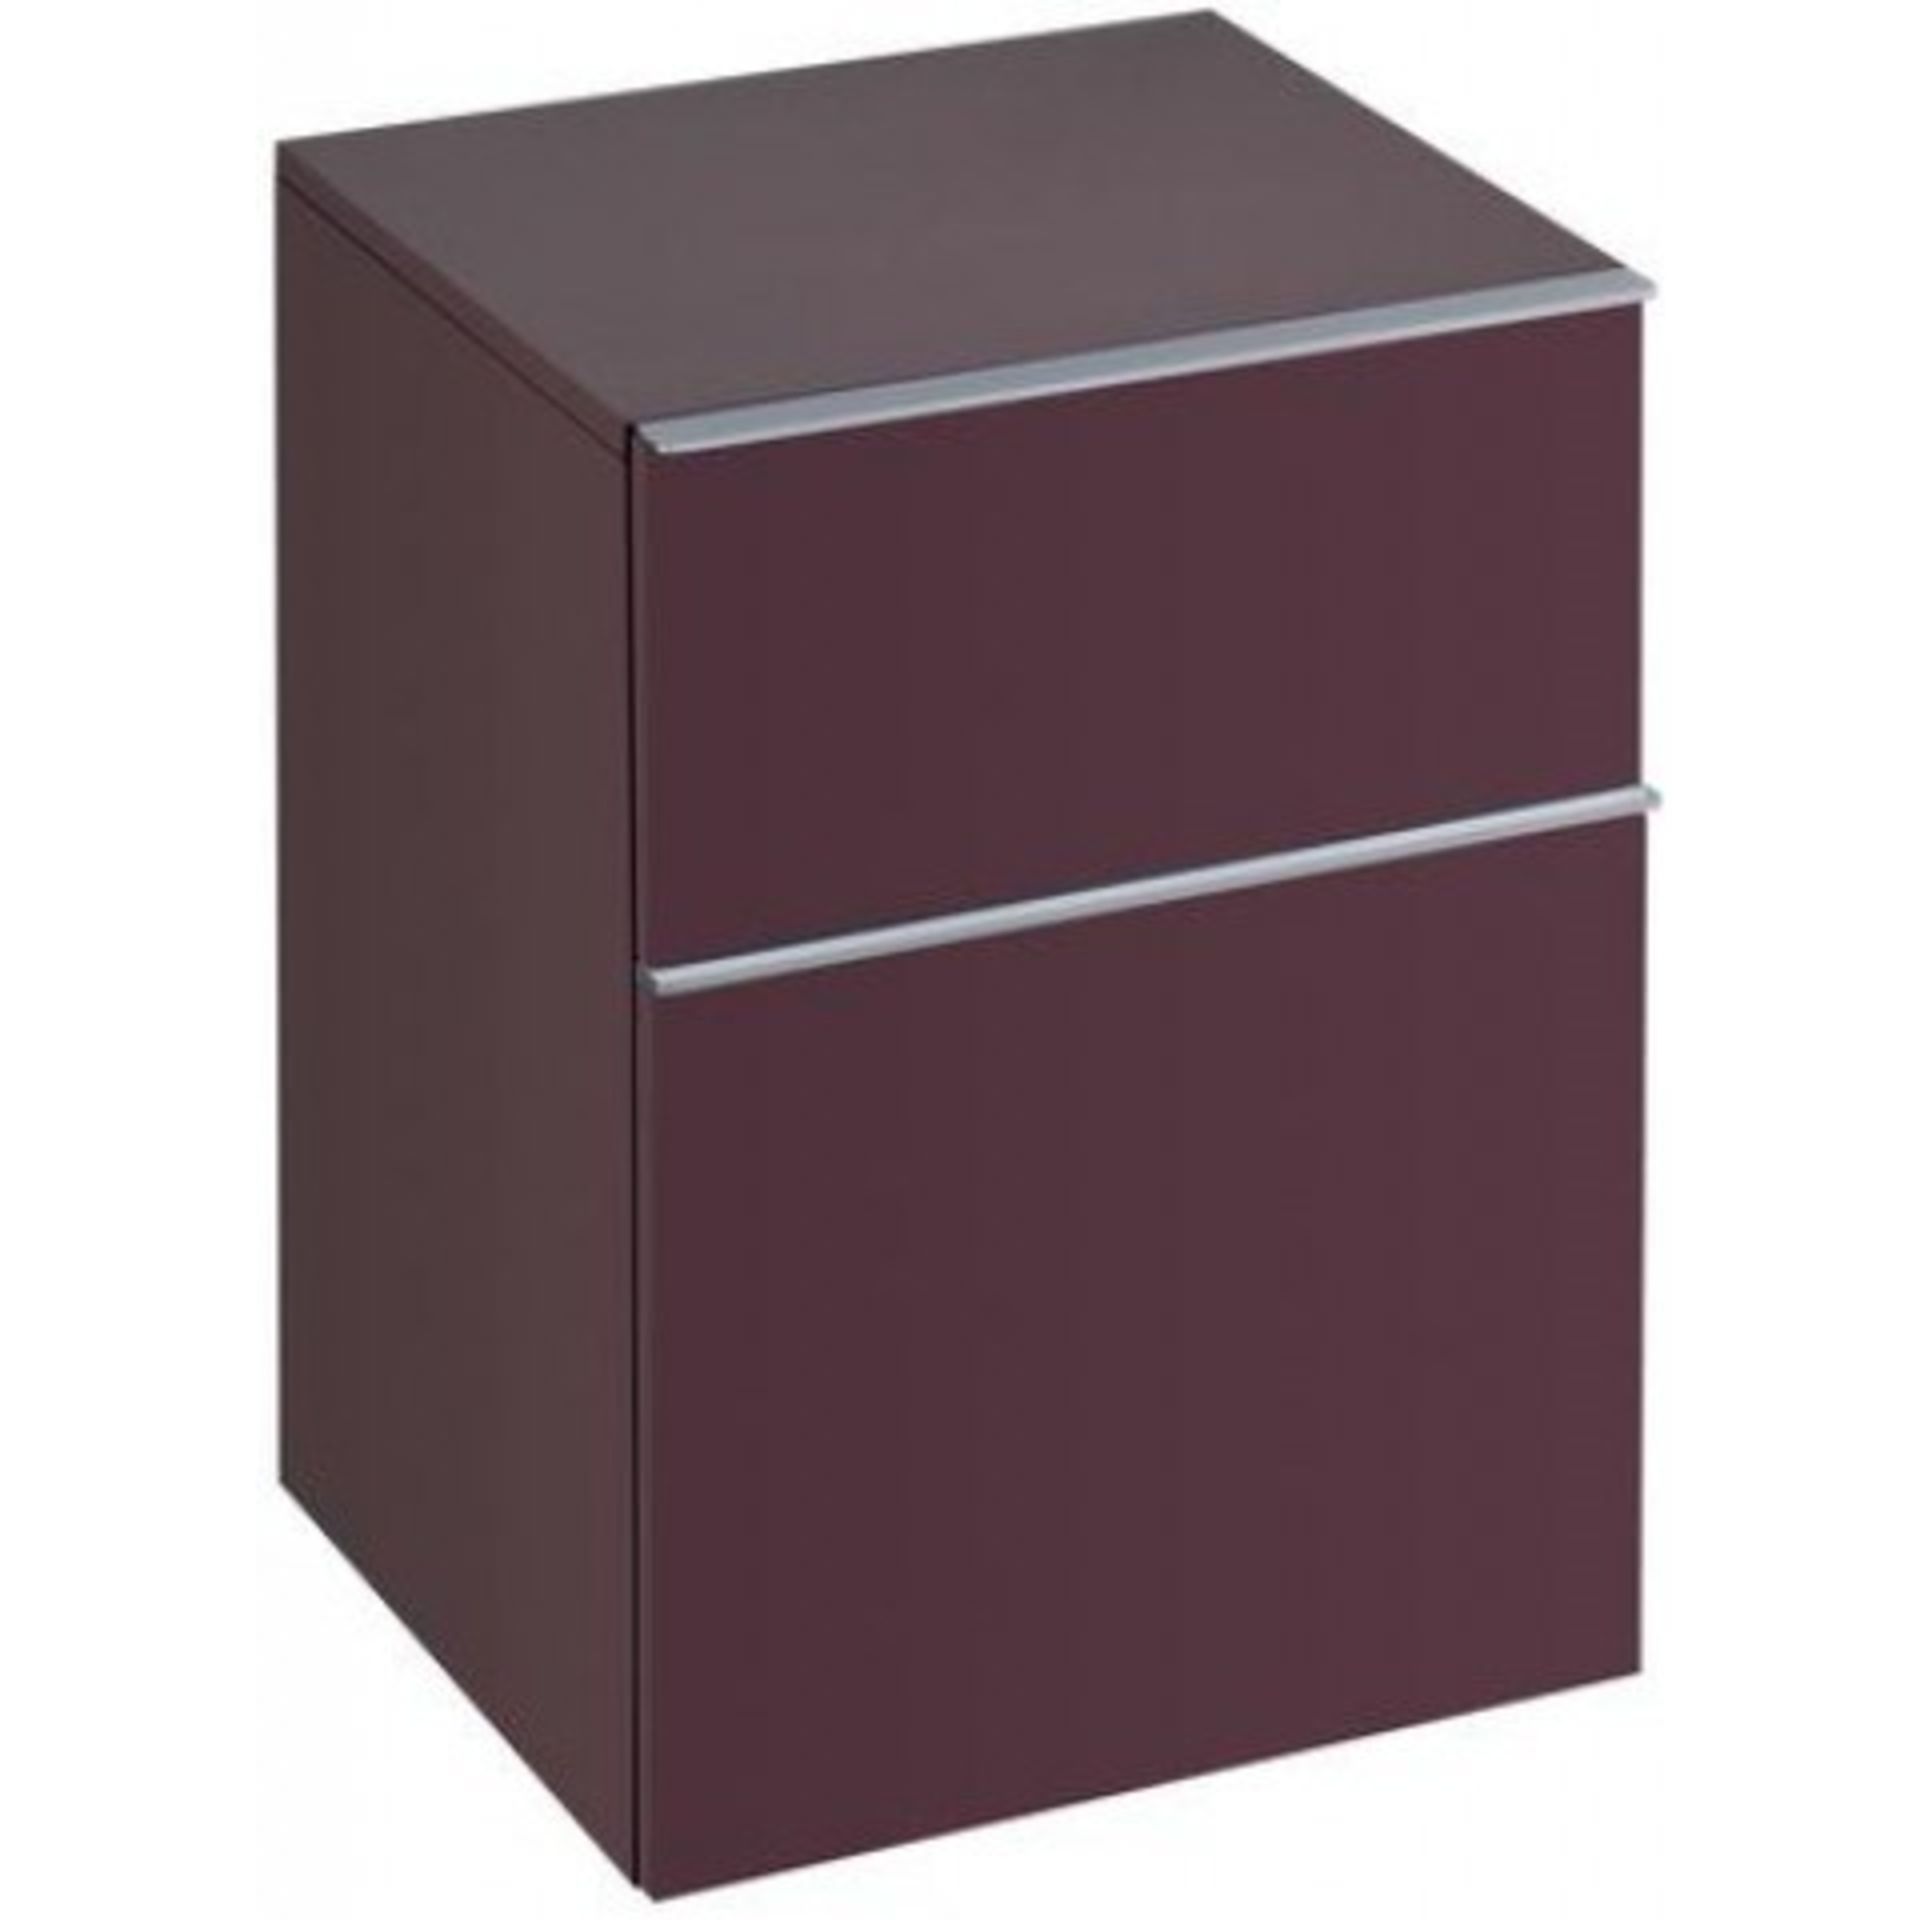 Brand New (WS70) Keramag Gerbit Icon 450mm Burgendy Side Cabinet. RRP £469.99.Add a pop of colour to